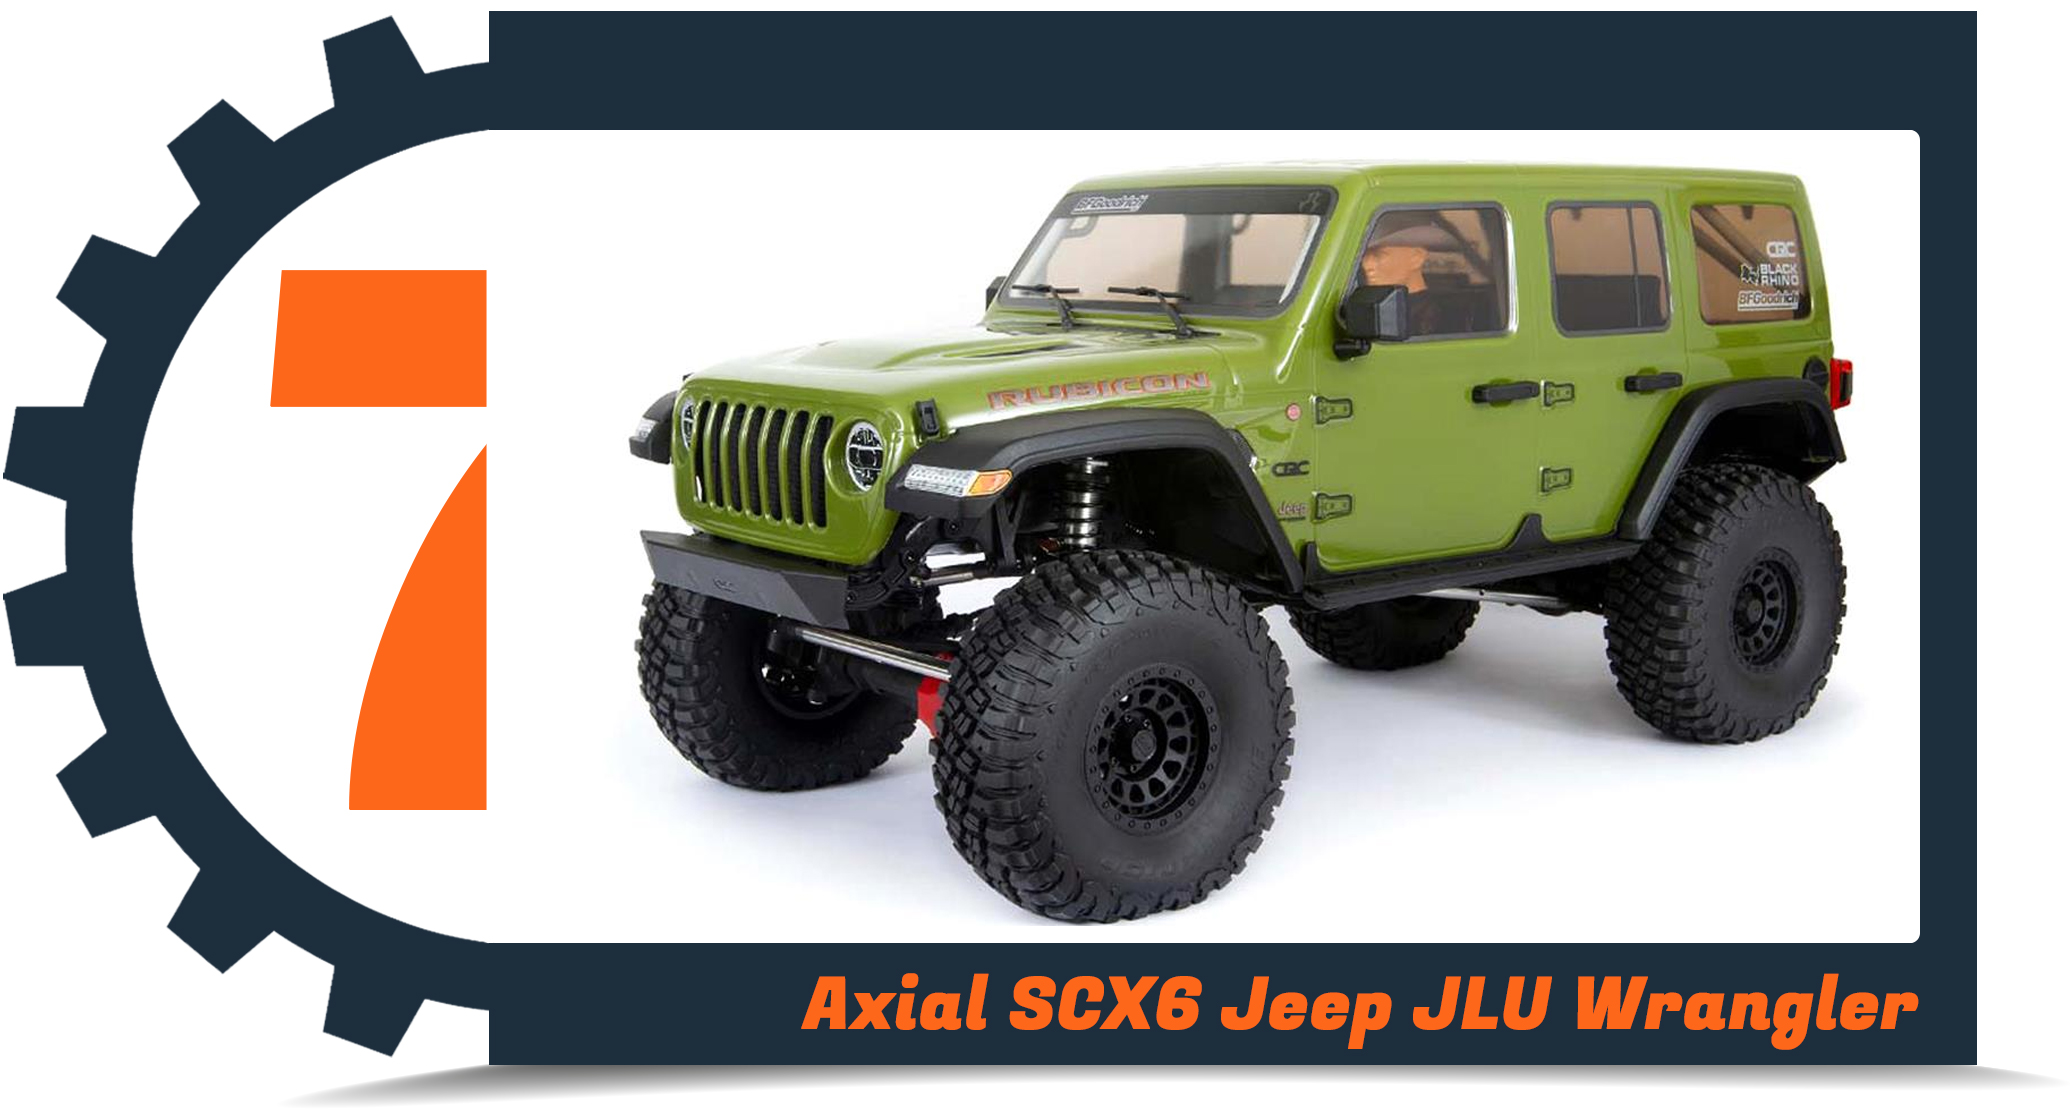 Top 10 RC Cars - Number 7 - Axial SCX6 Jeep Wrangler JLU